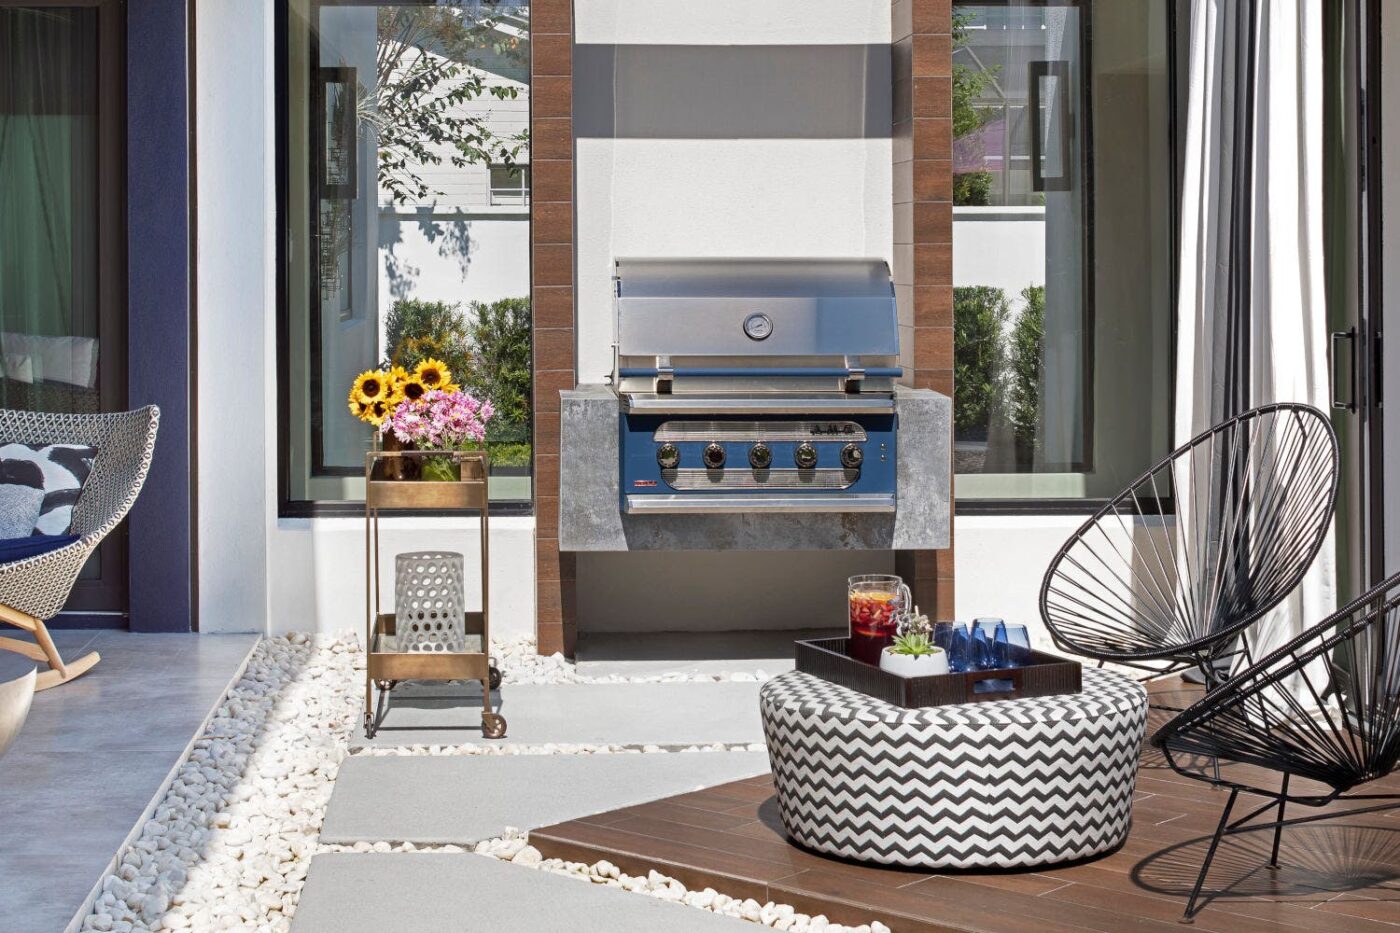 Image of Barbacoa Orix de Dekton Copyright Jessica Klewicki in Terraces: the protagonists of a summer at home - Cosentino